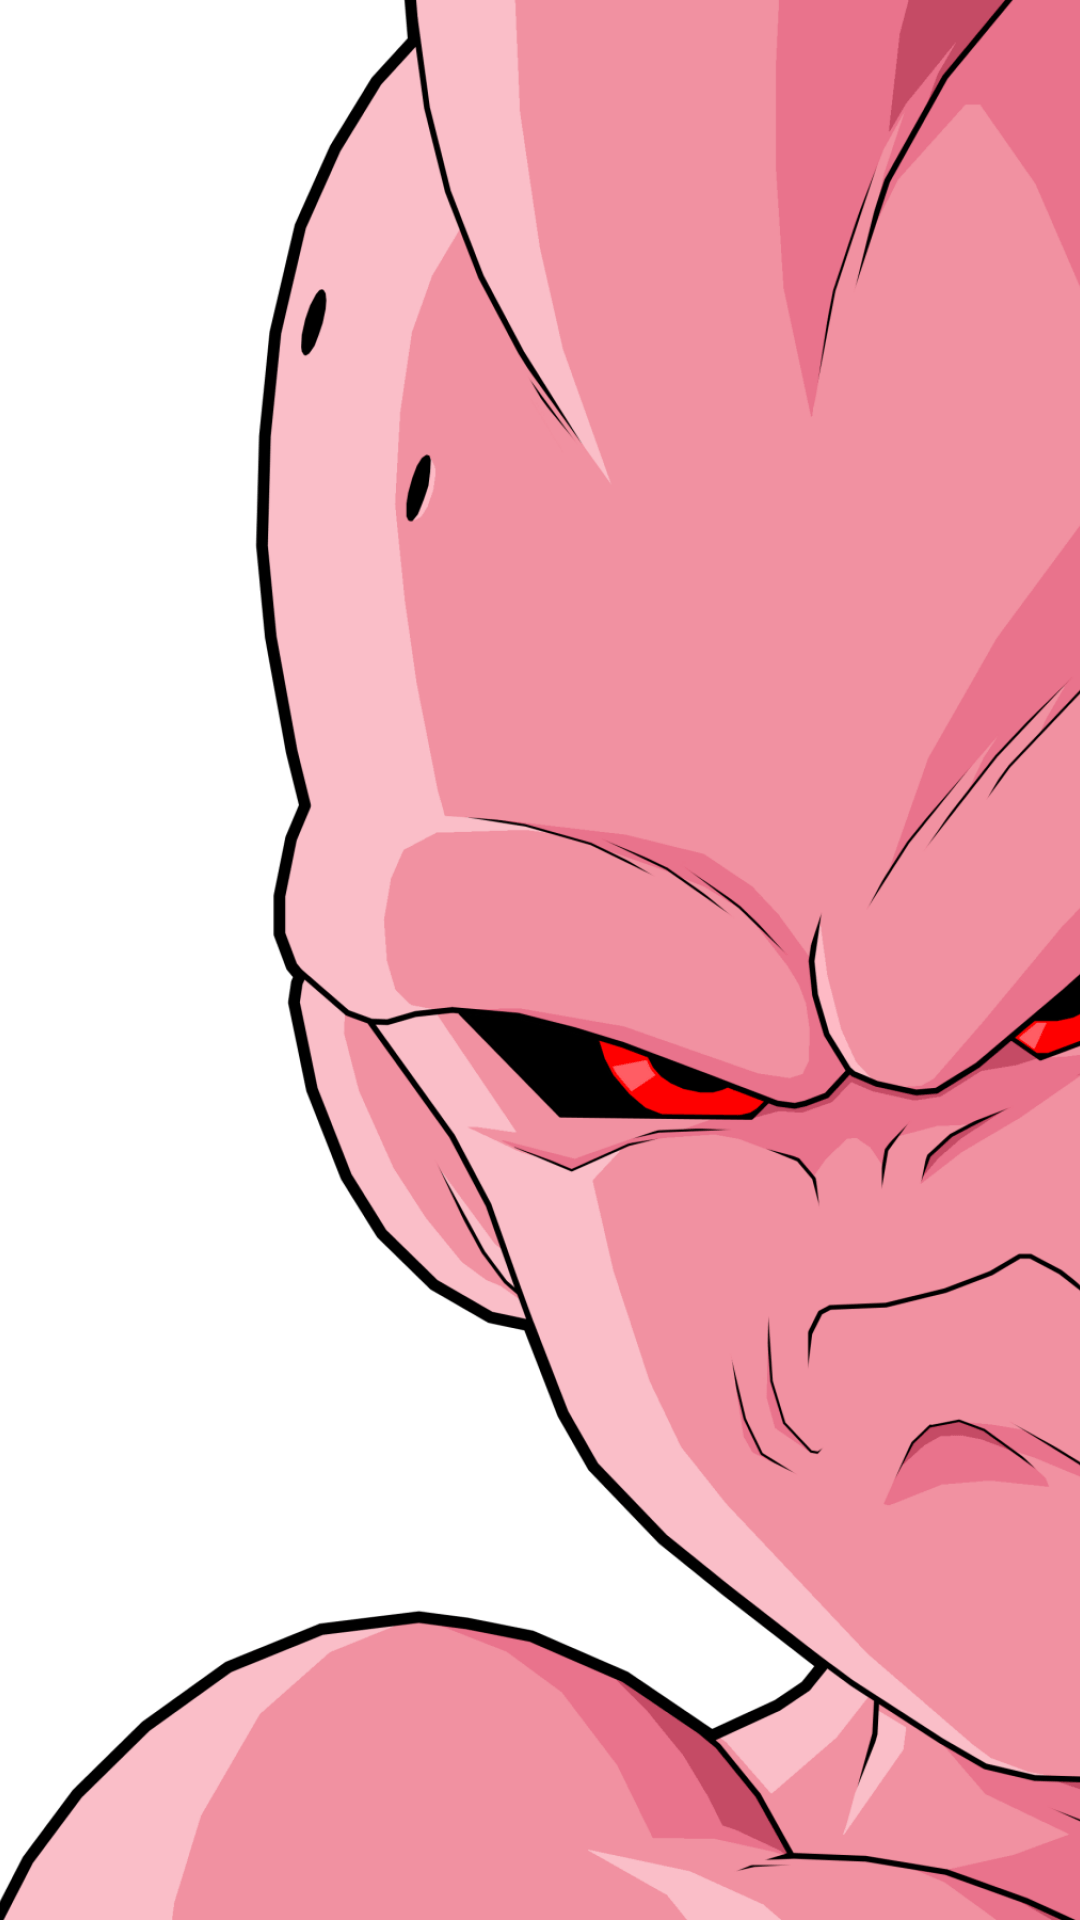 Majin Buu Dragon Ball FighterZ Android 18 Goku Dragon Ball Z: Ultimate  Tenkaichi, Dragon Ball FighterZ, purple, violet, computer Wallpaper png |  PNGWing